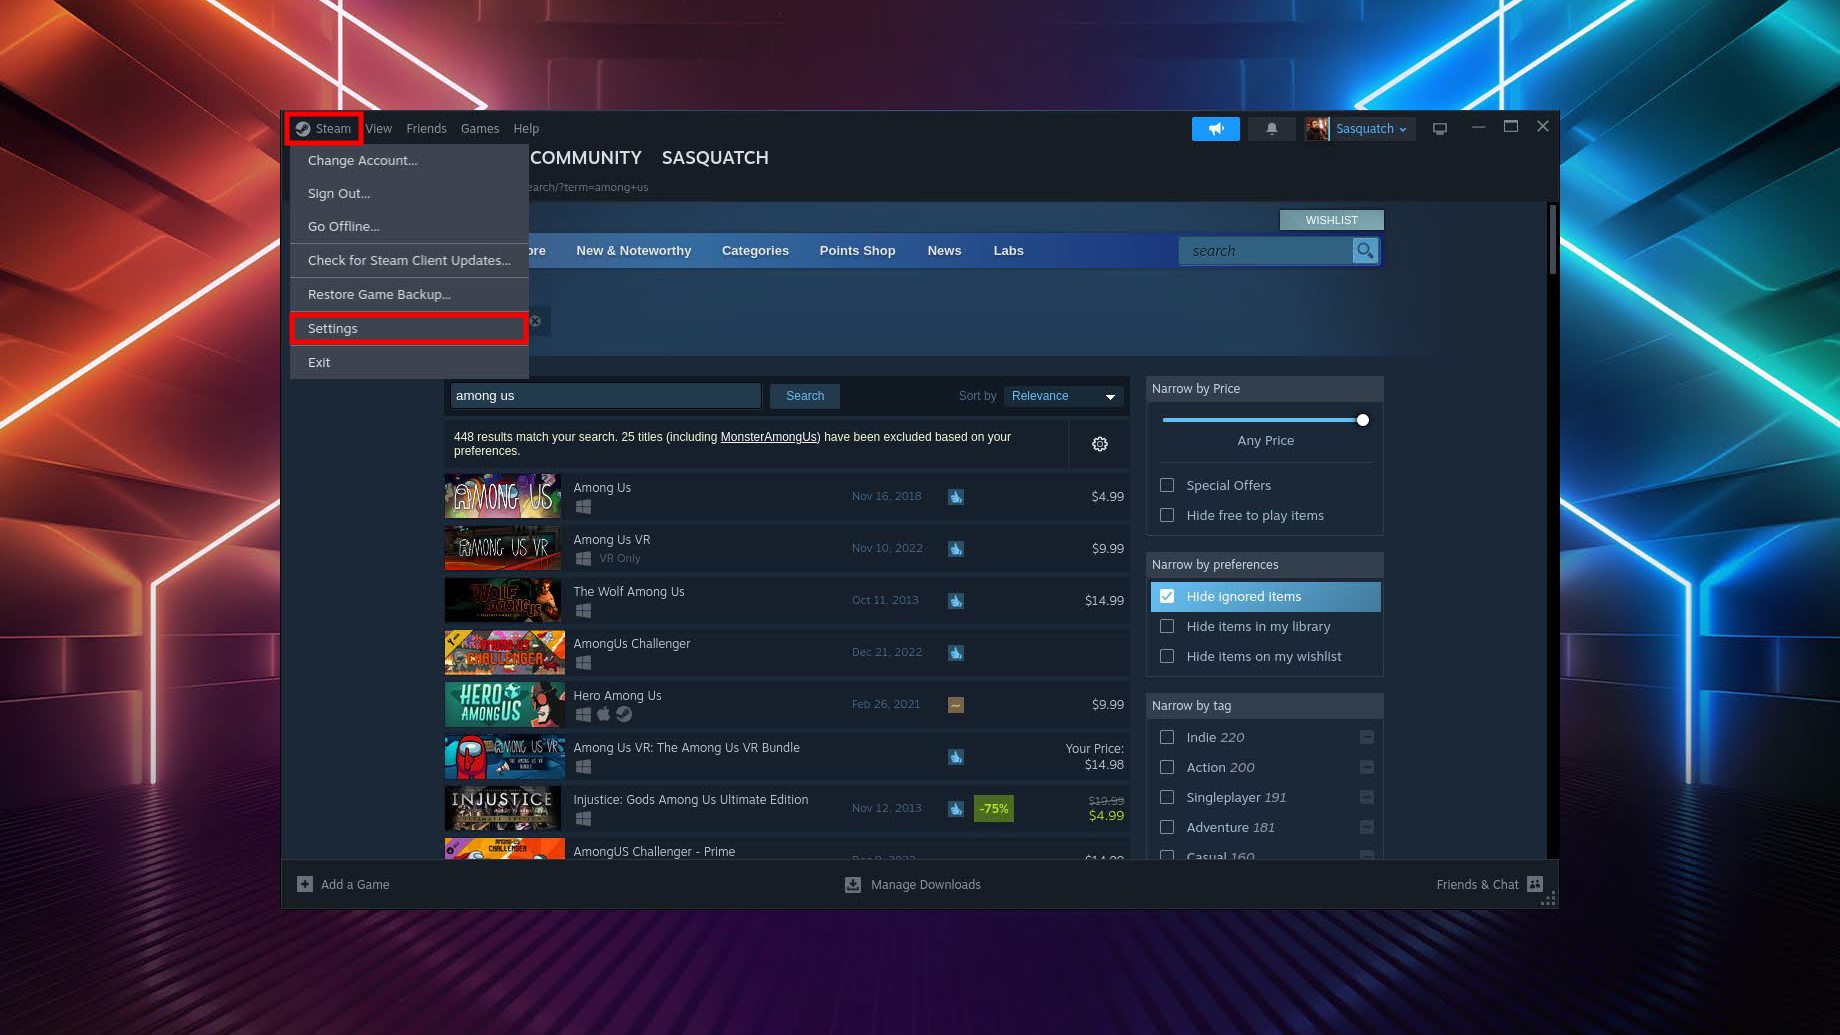 Download Among Us from Steam app on Chromebook 2